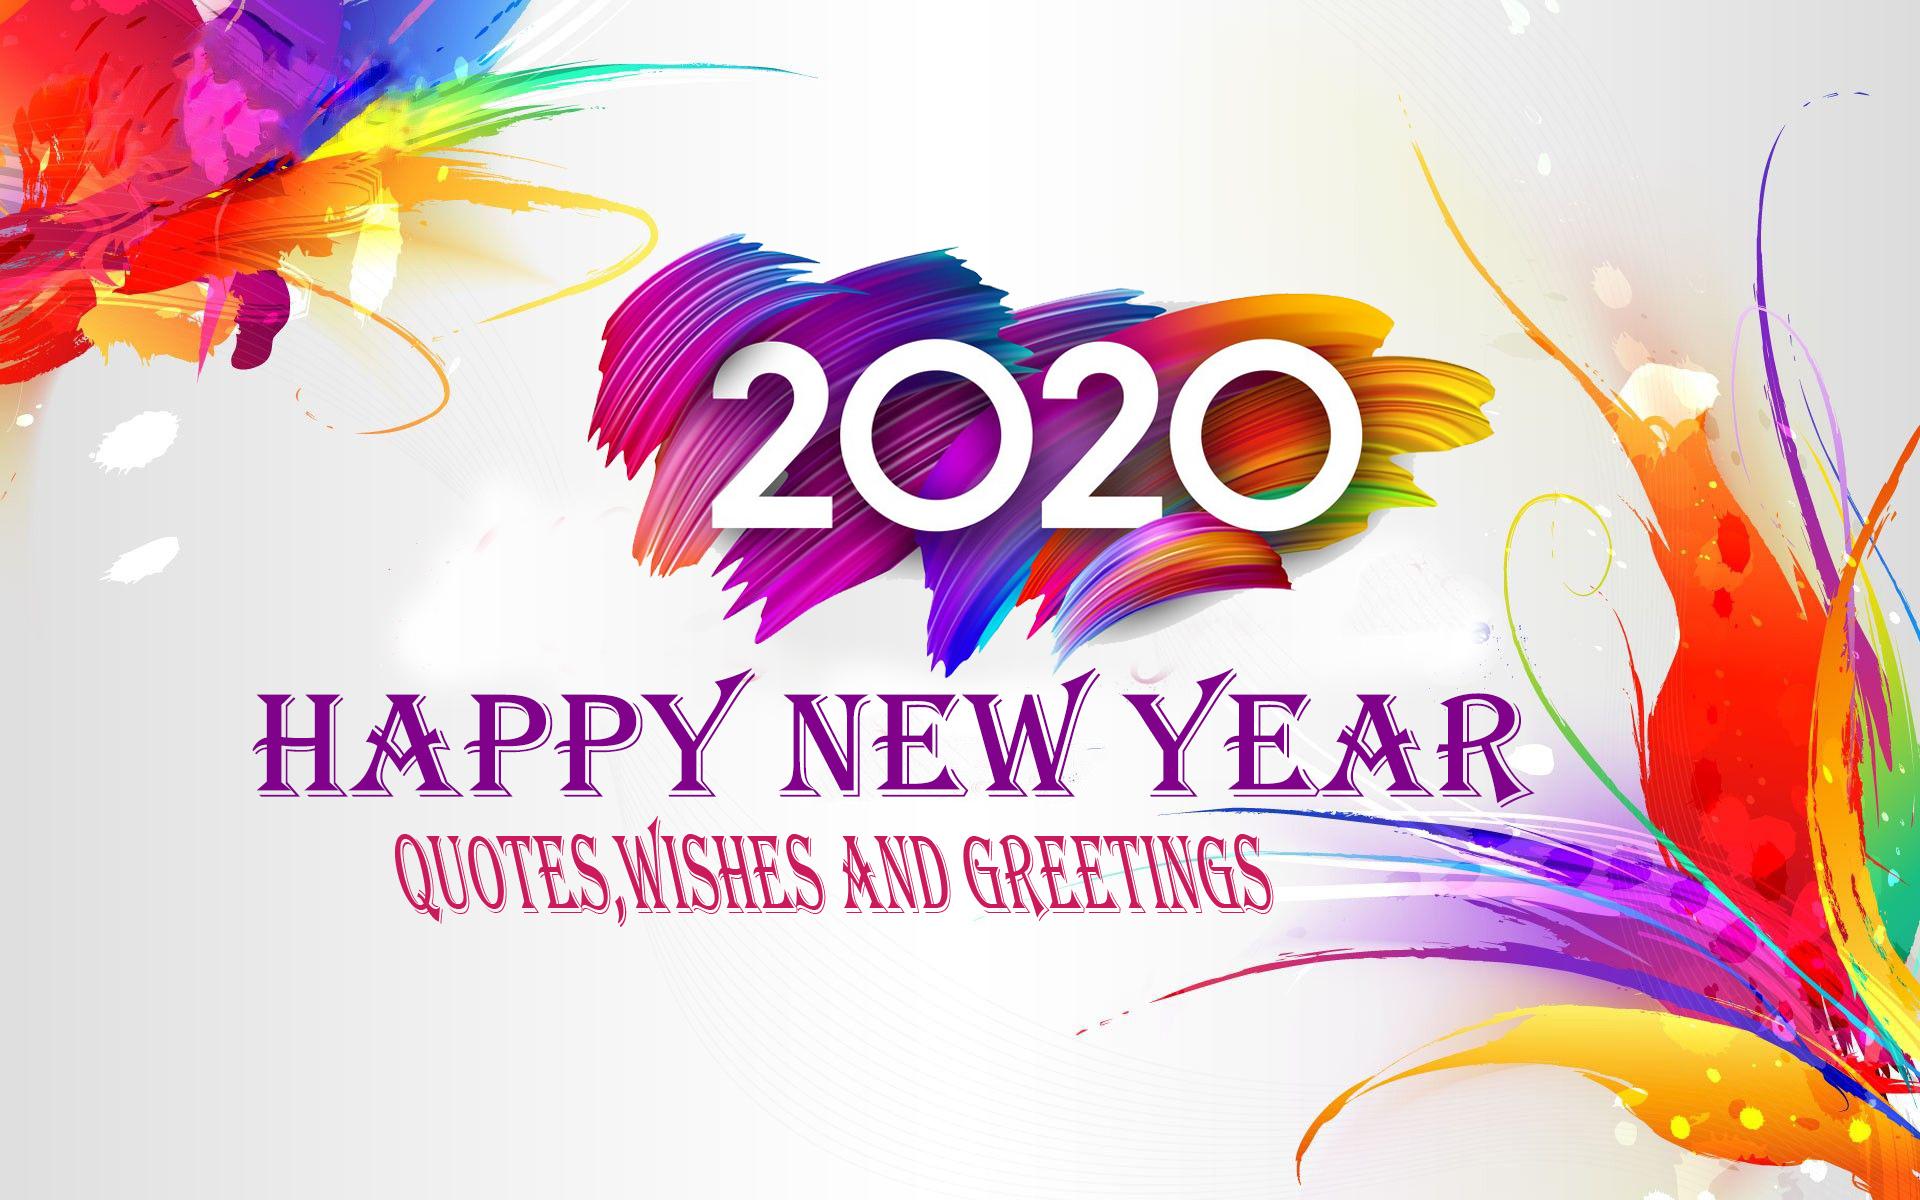 Happy New Year 2020 Quotes, Image, Wishes and Greetings